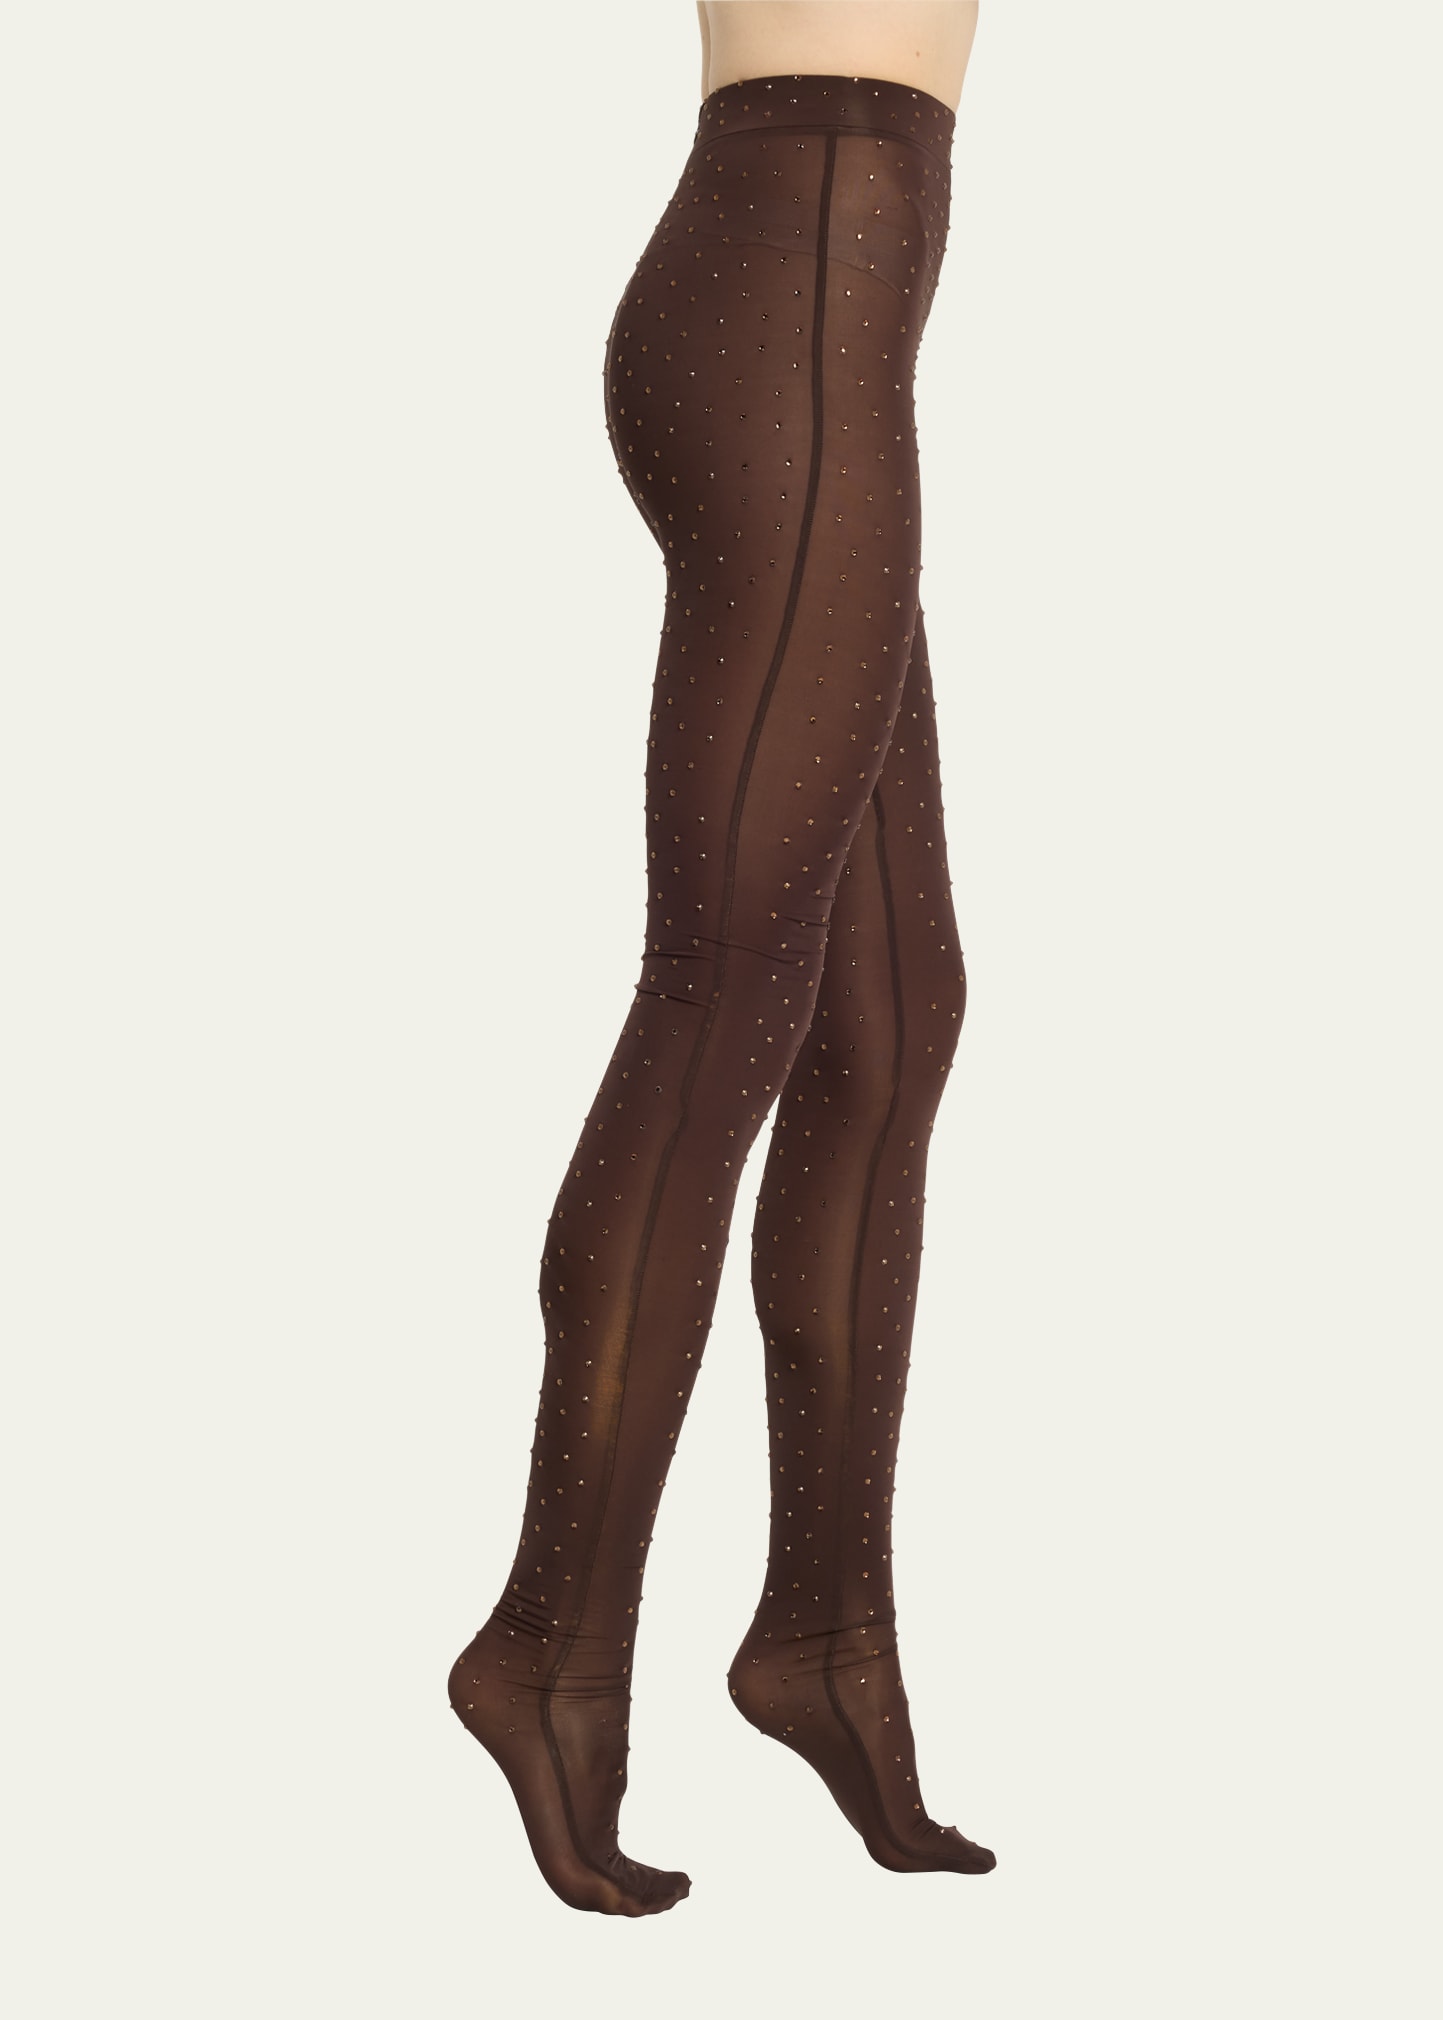 Alex Perry Rane Embellished Jersey Tights In Brown